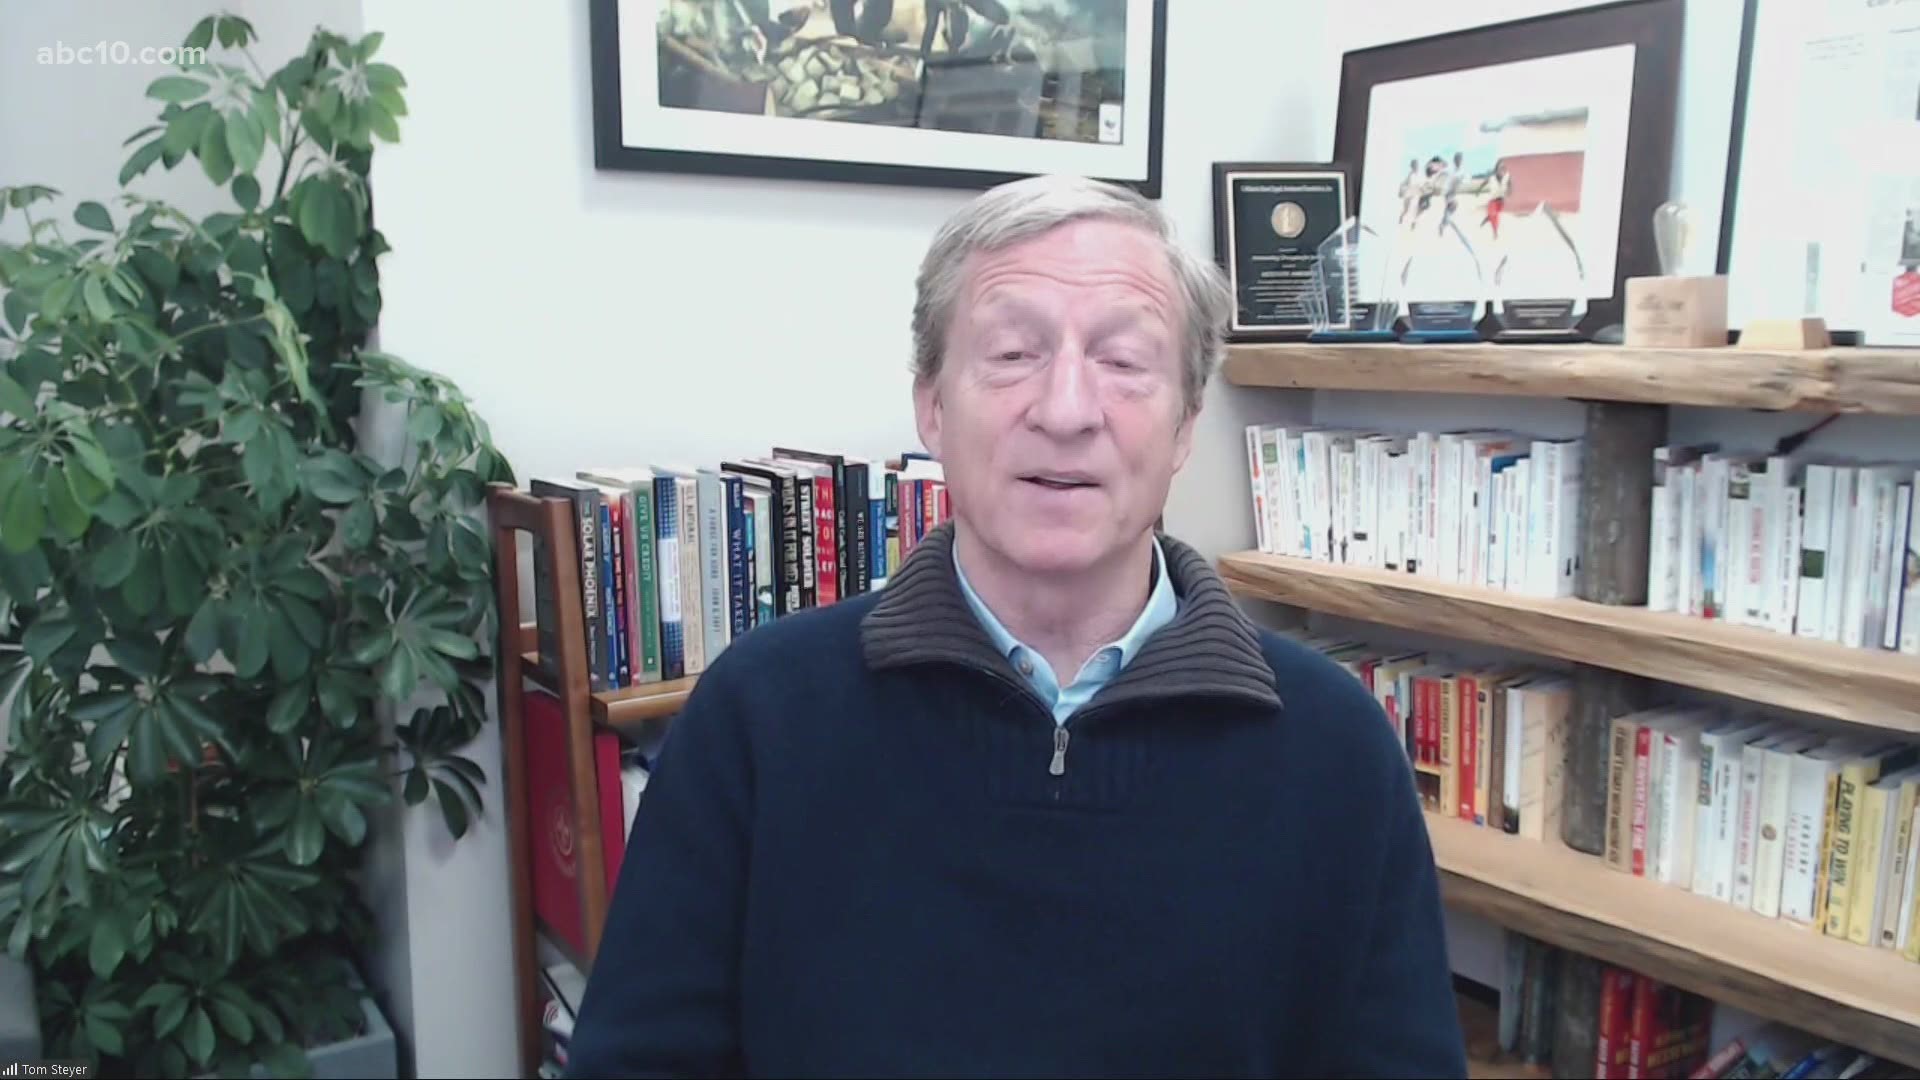 Former presidential candidate Tom Steyer, Gov. Newsom’s Chief Advisor on Business and Jobs Recovery, explains what jobs, business and the economy will look like.